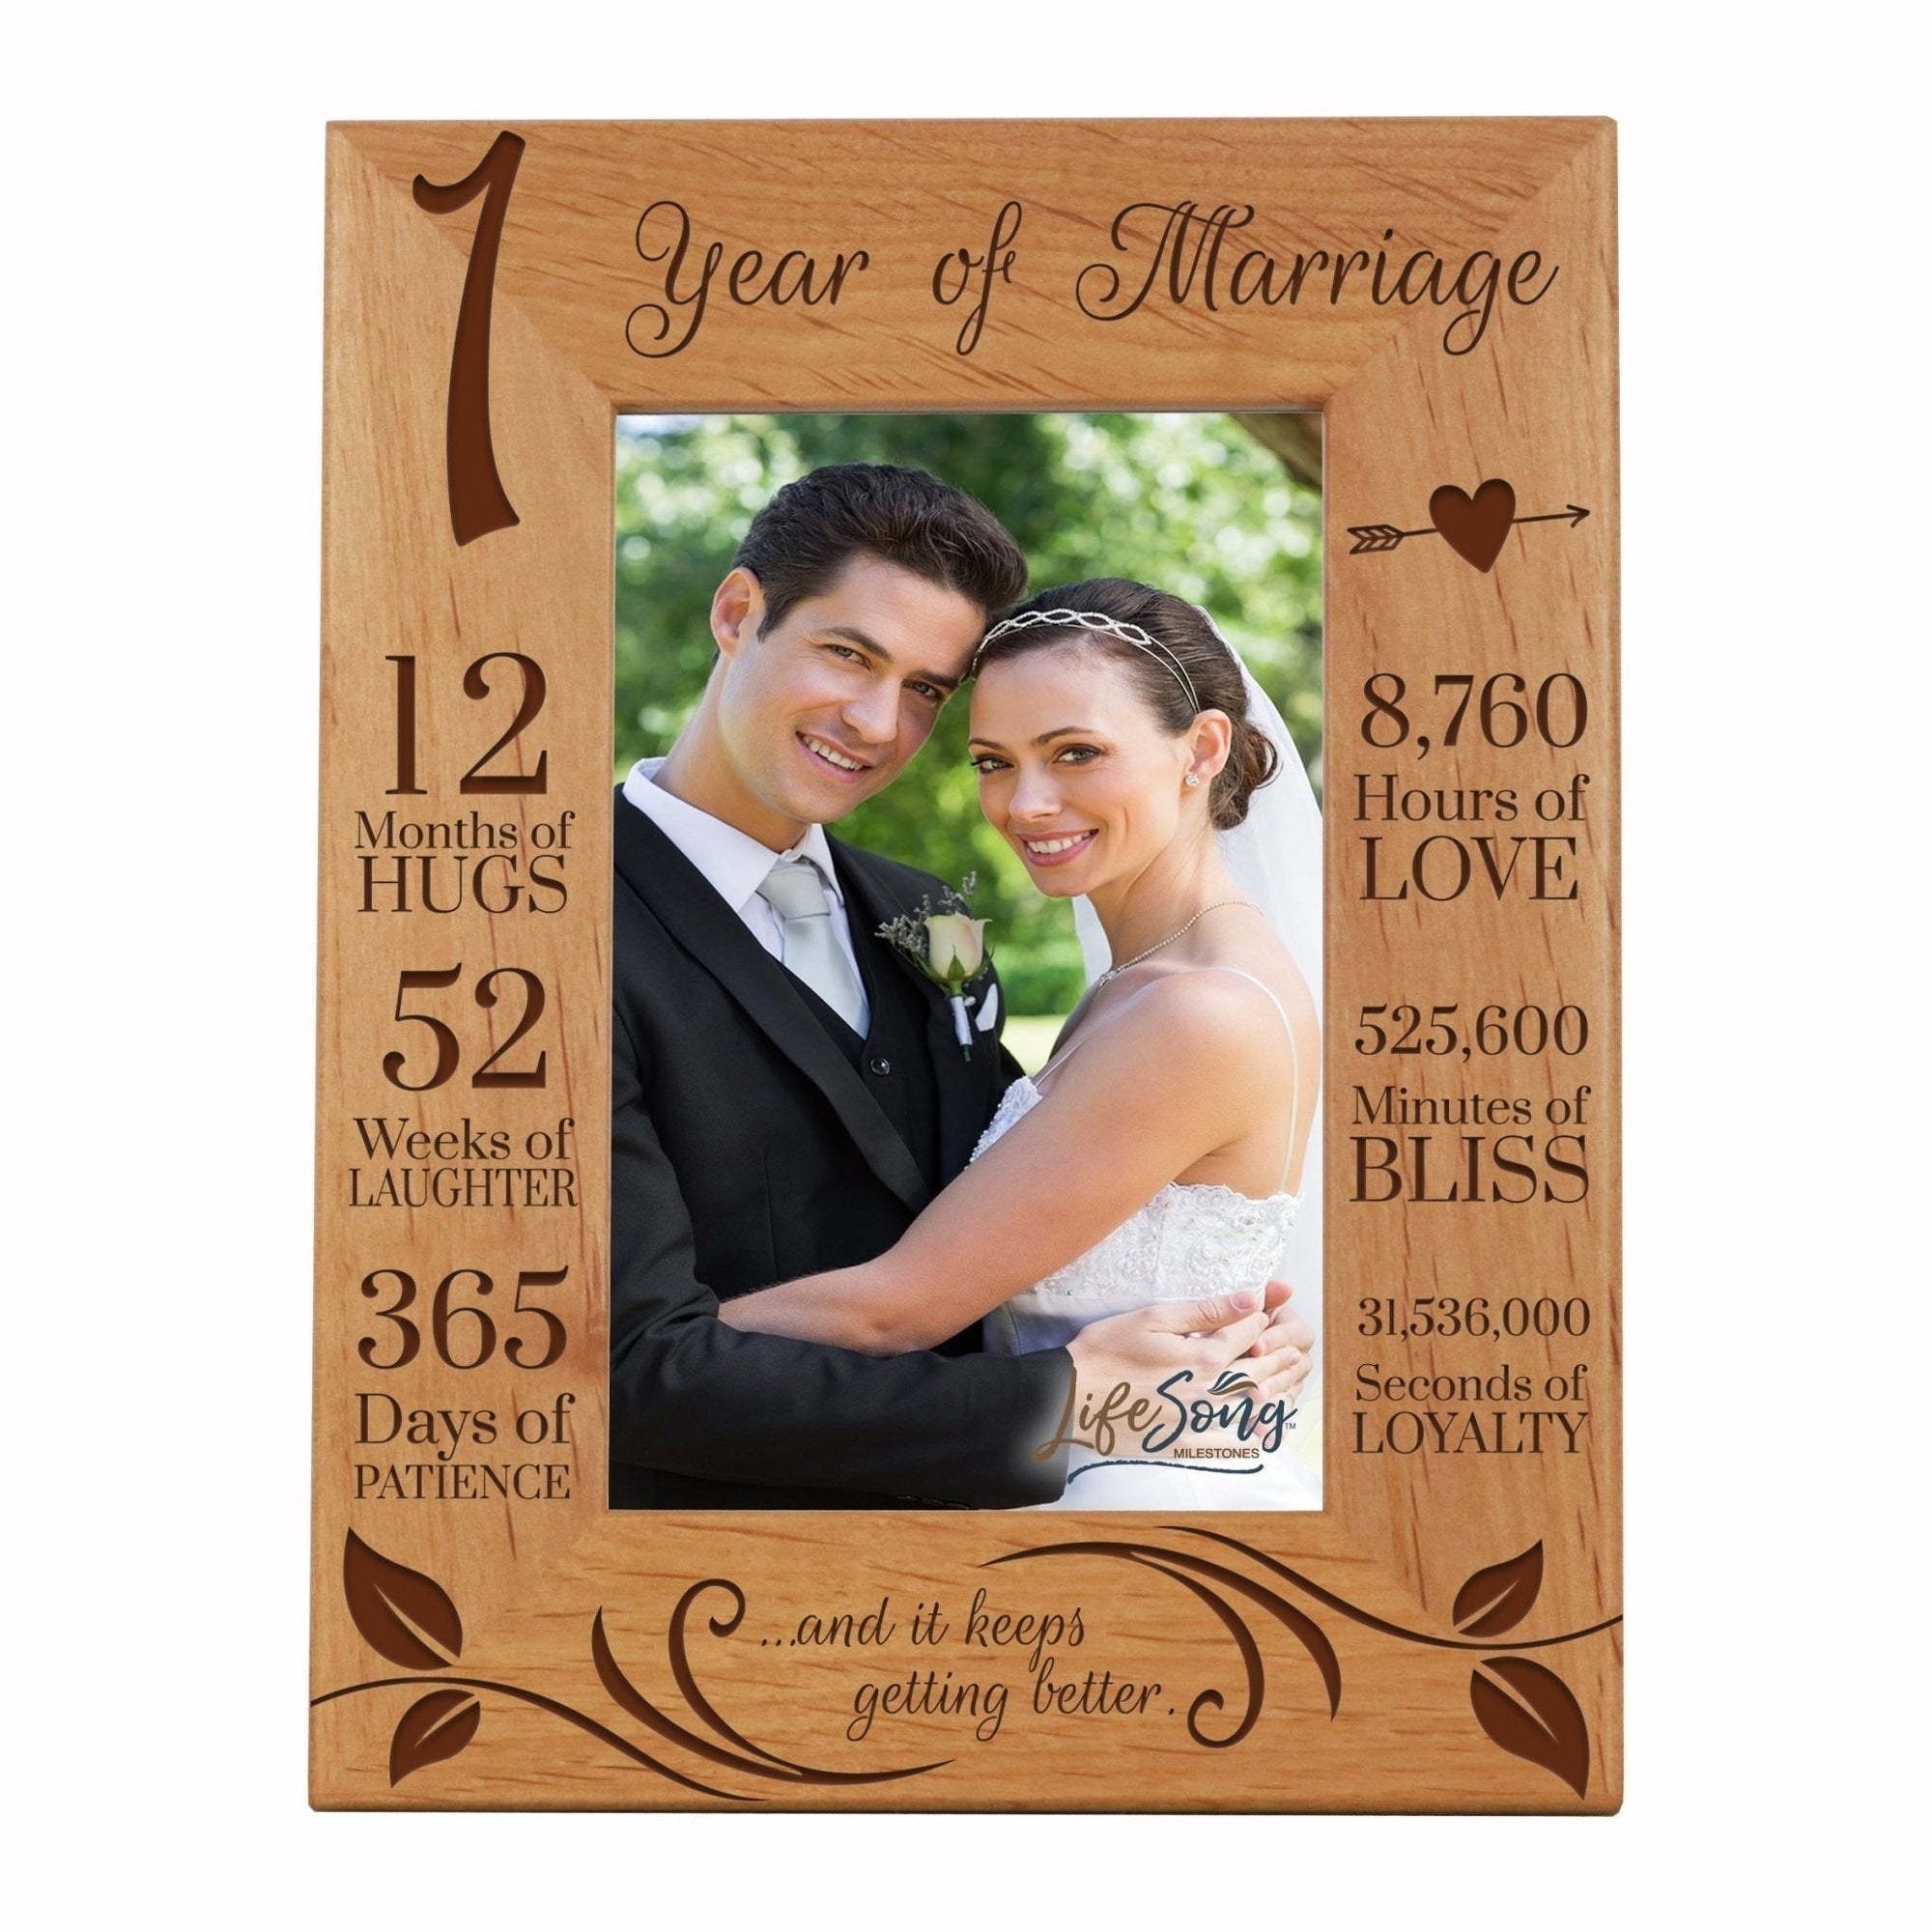 Engraved 1st Wedding Anniversary Photo Frame Wall Decor Gift for Couples - Keeps Getting Better - LifeSong Milestones